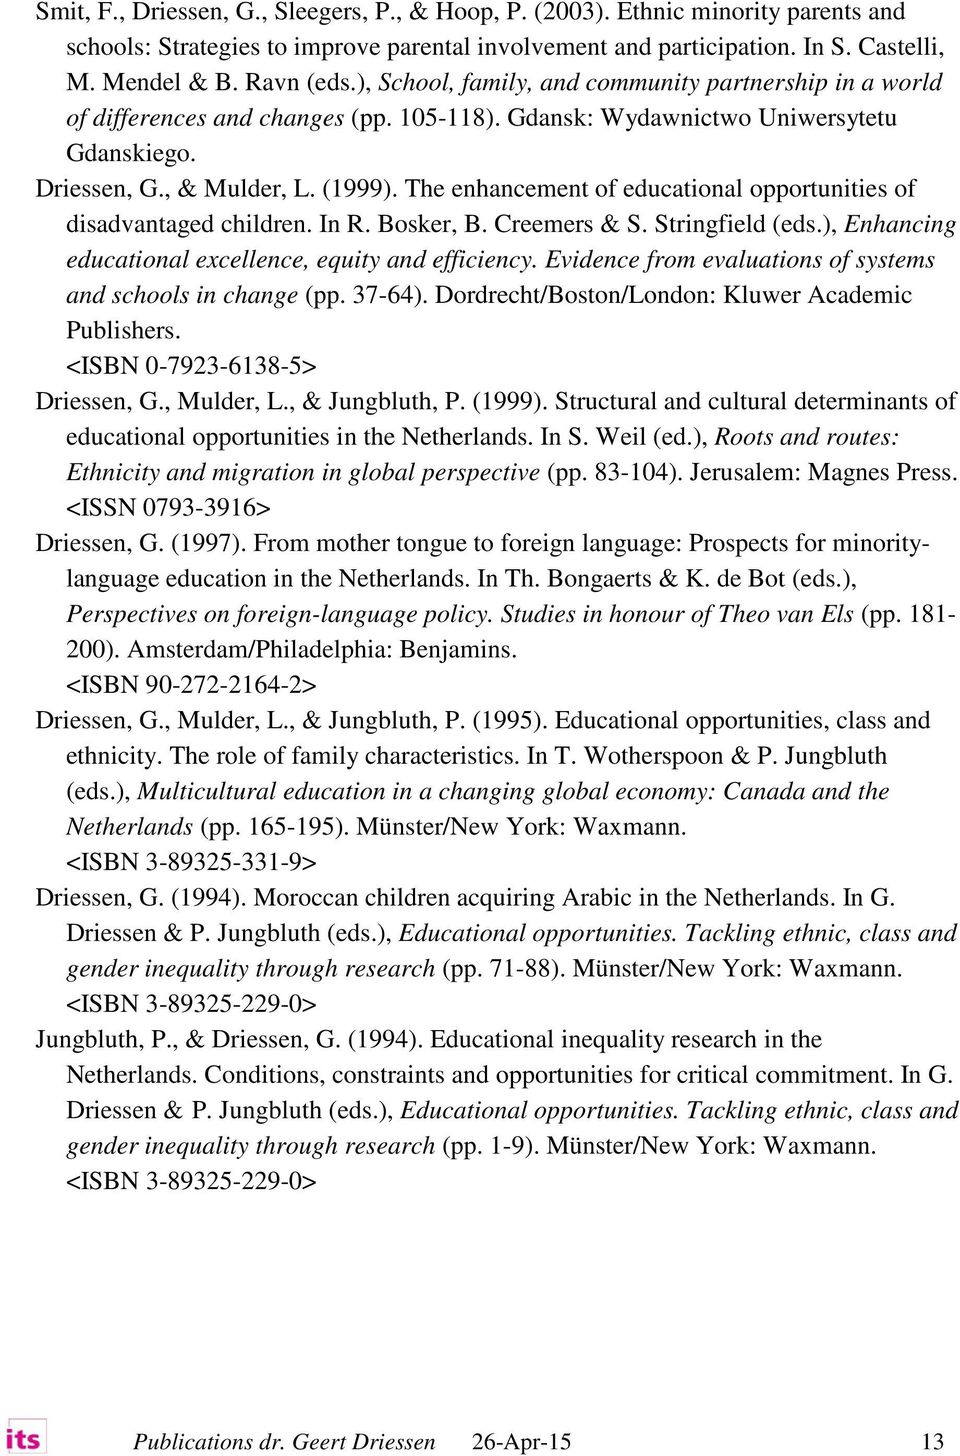 The enhancement of educational opportunities of disadvantaged children. In R. Bosker, B. Creemers & S. Stringfield (eds.), Enhancing educational excellence, equity and efficiency.